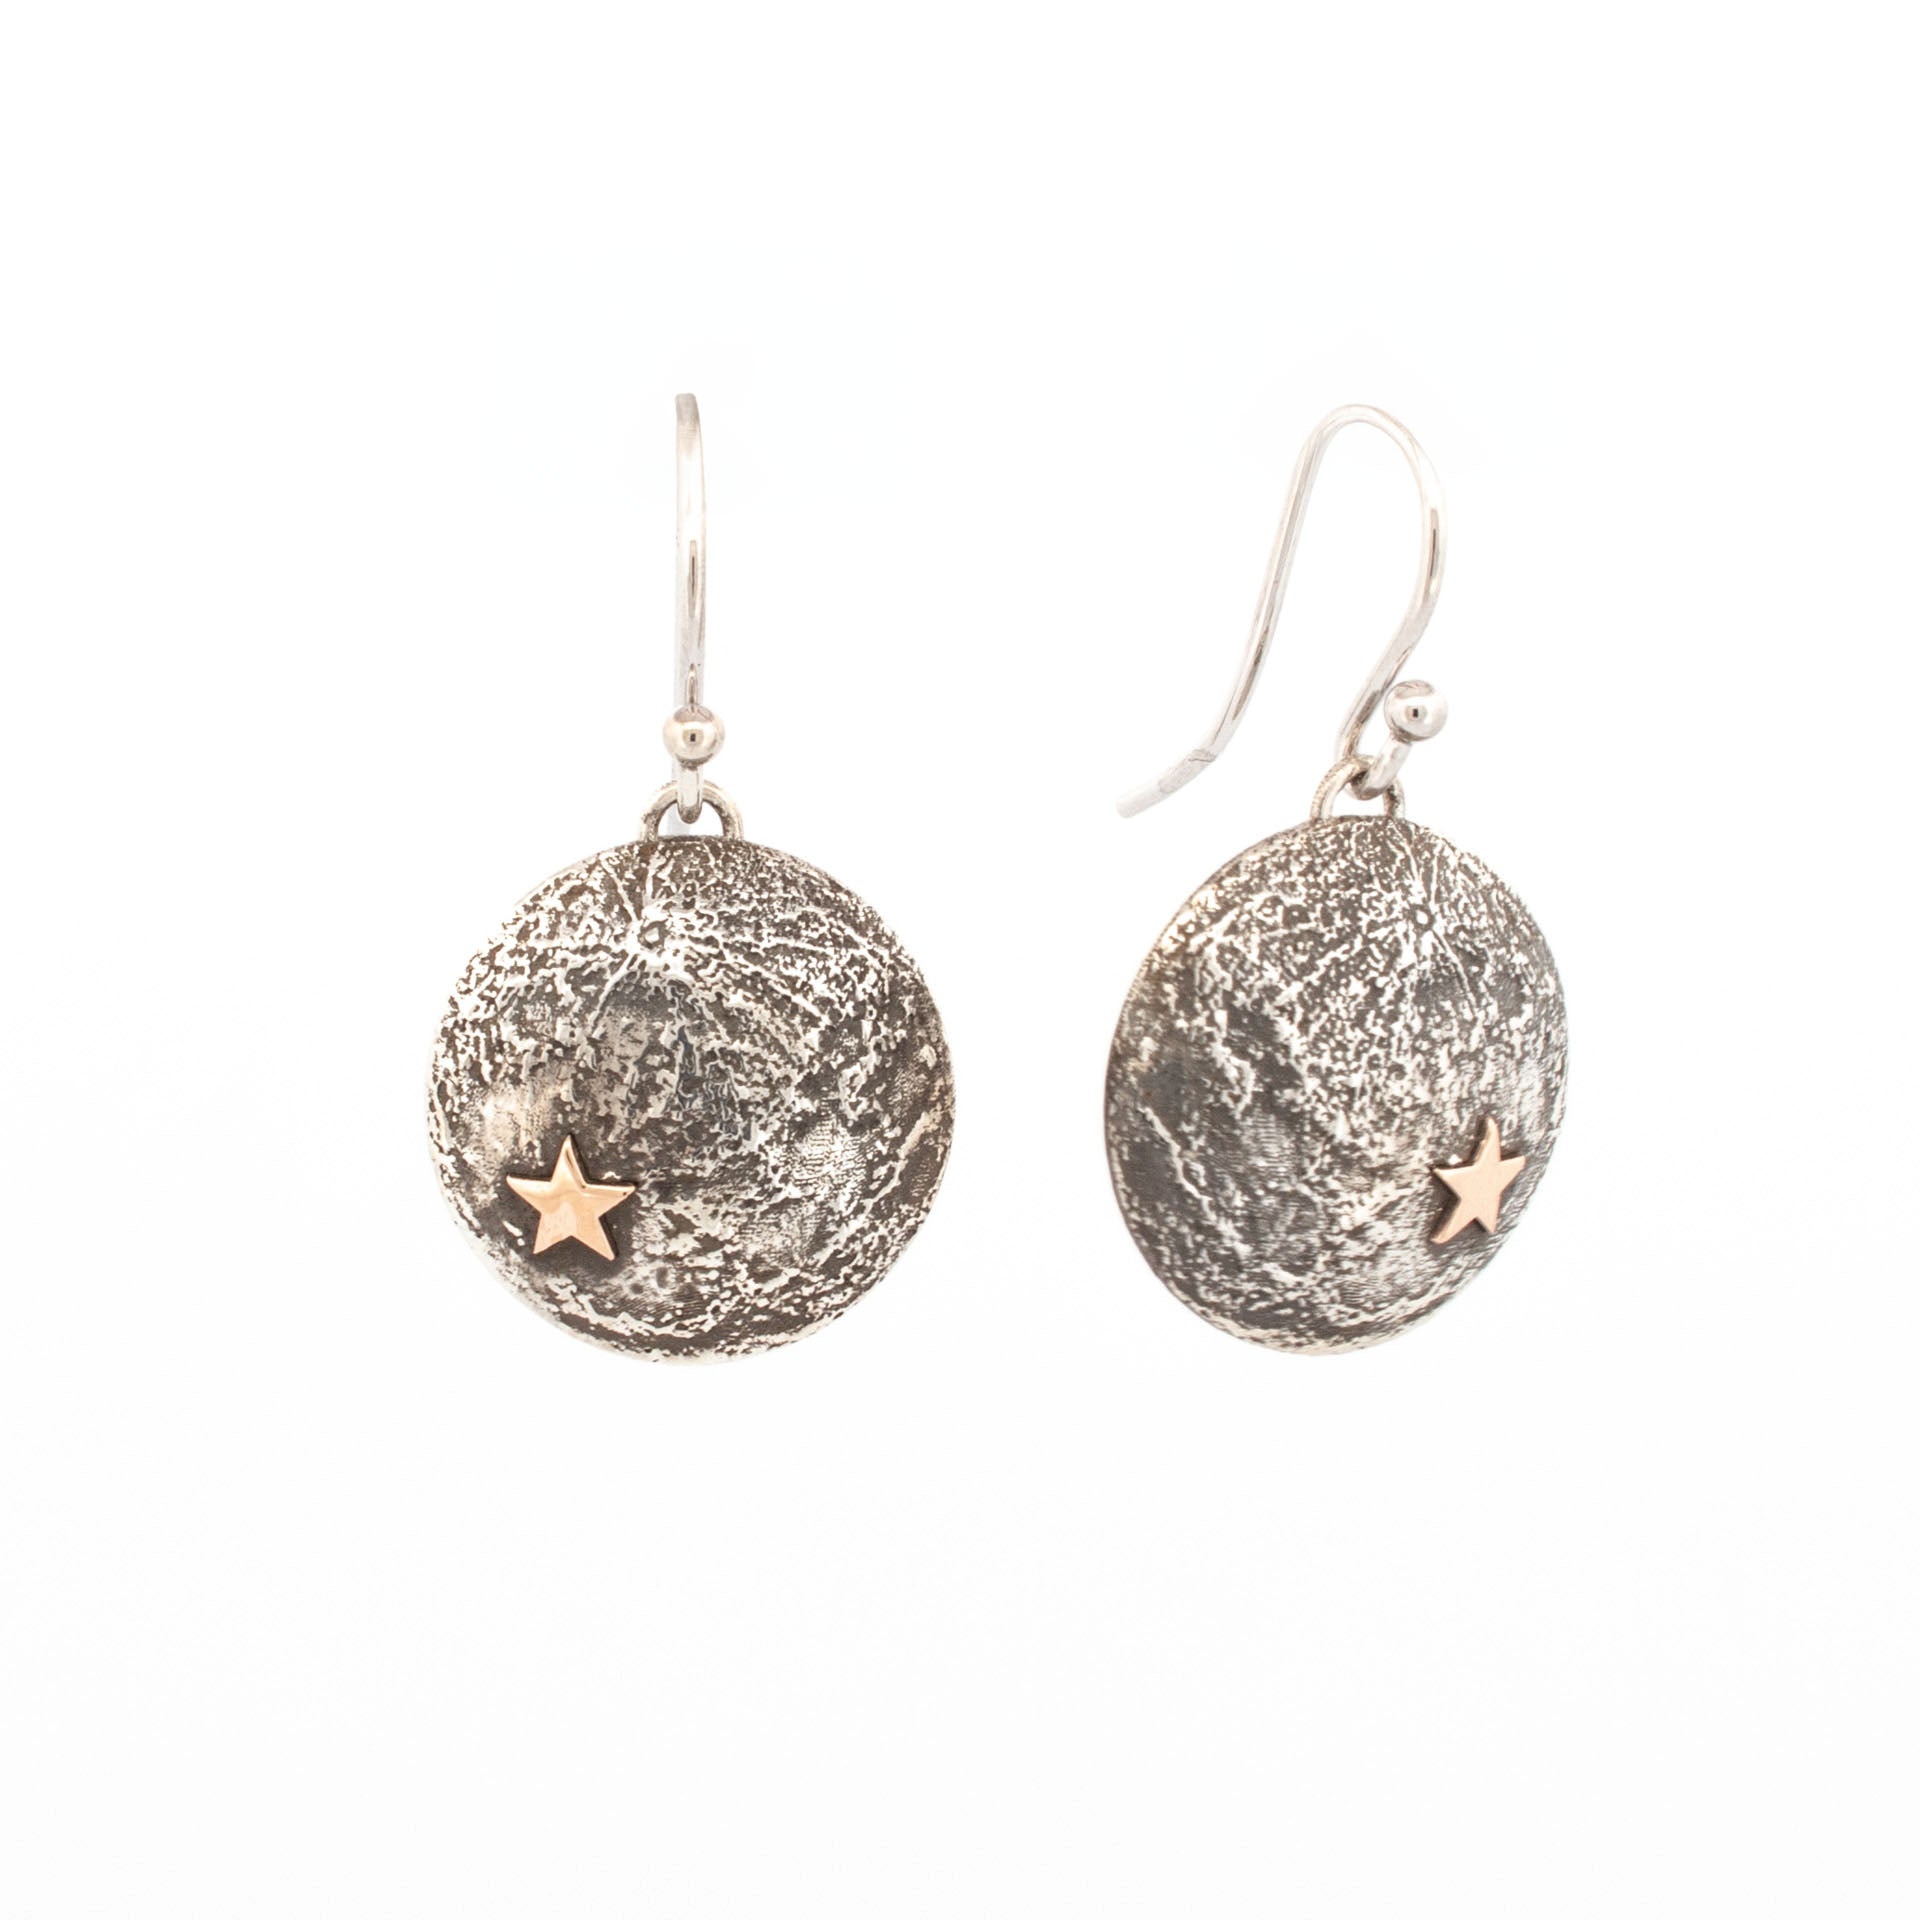 Topographical Moon Map Earrings with Stars